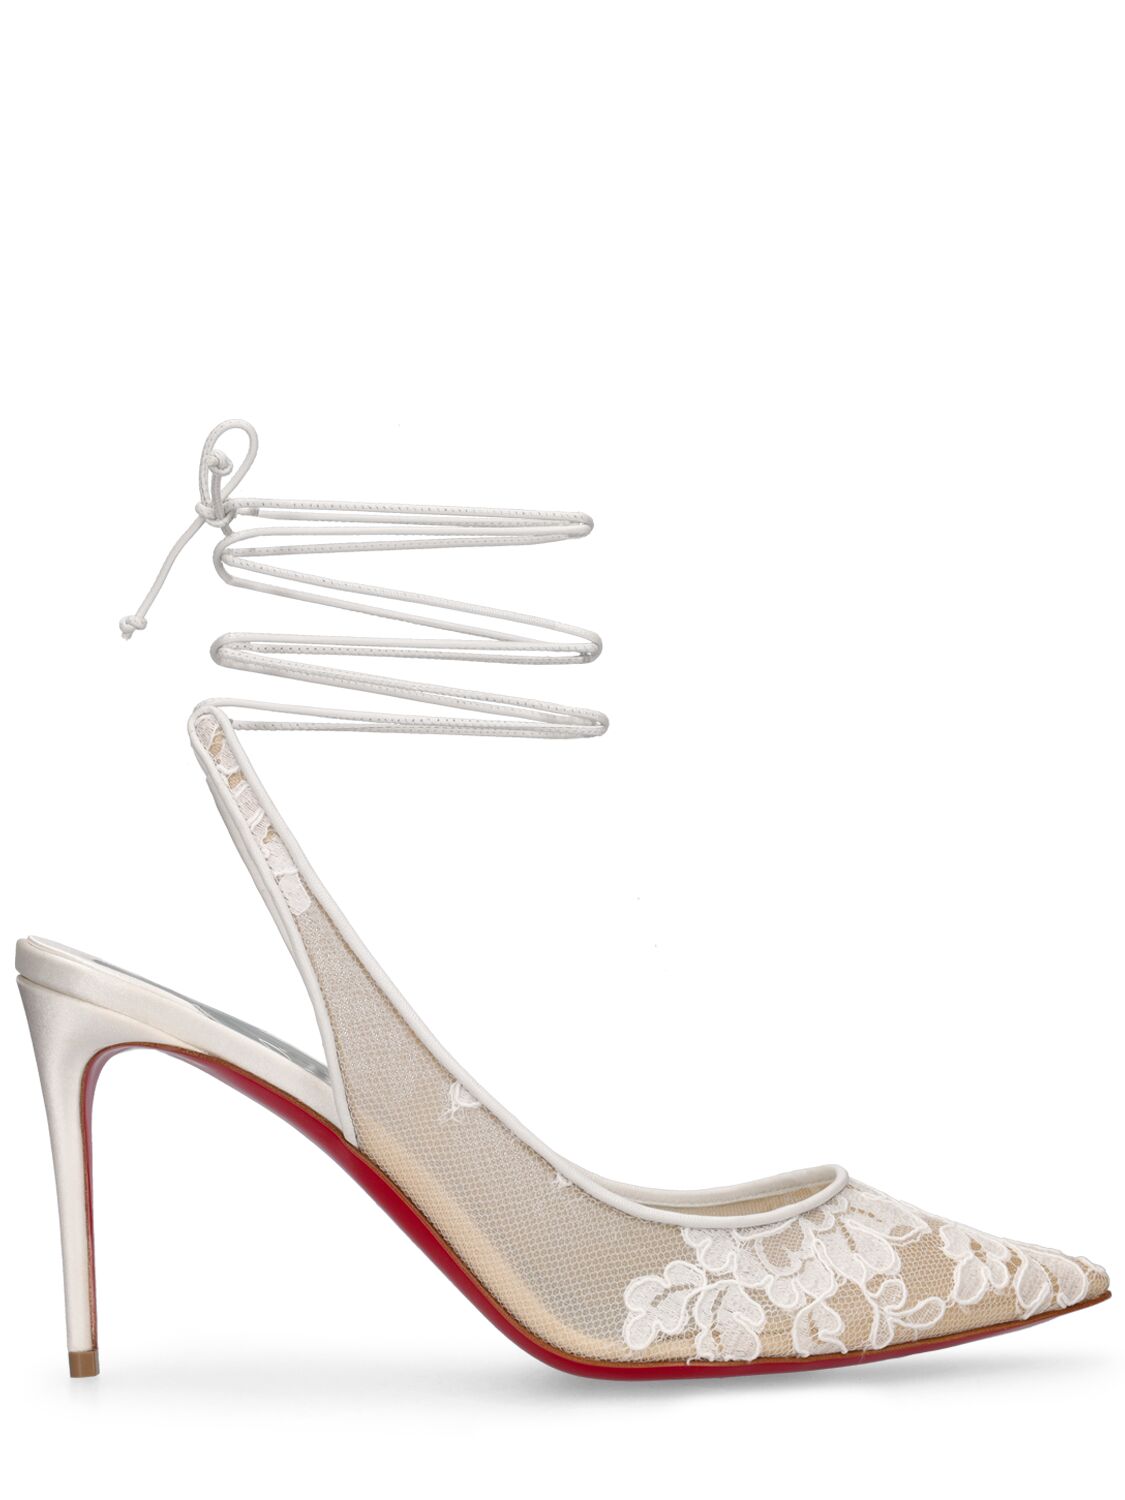 Christian Louboutin 85mm Kate Lace Pumps In White